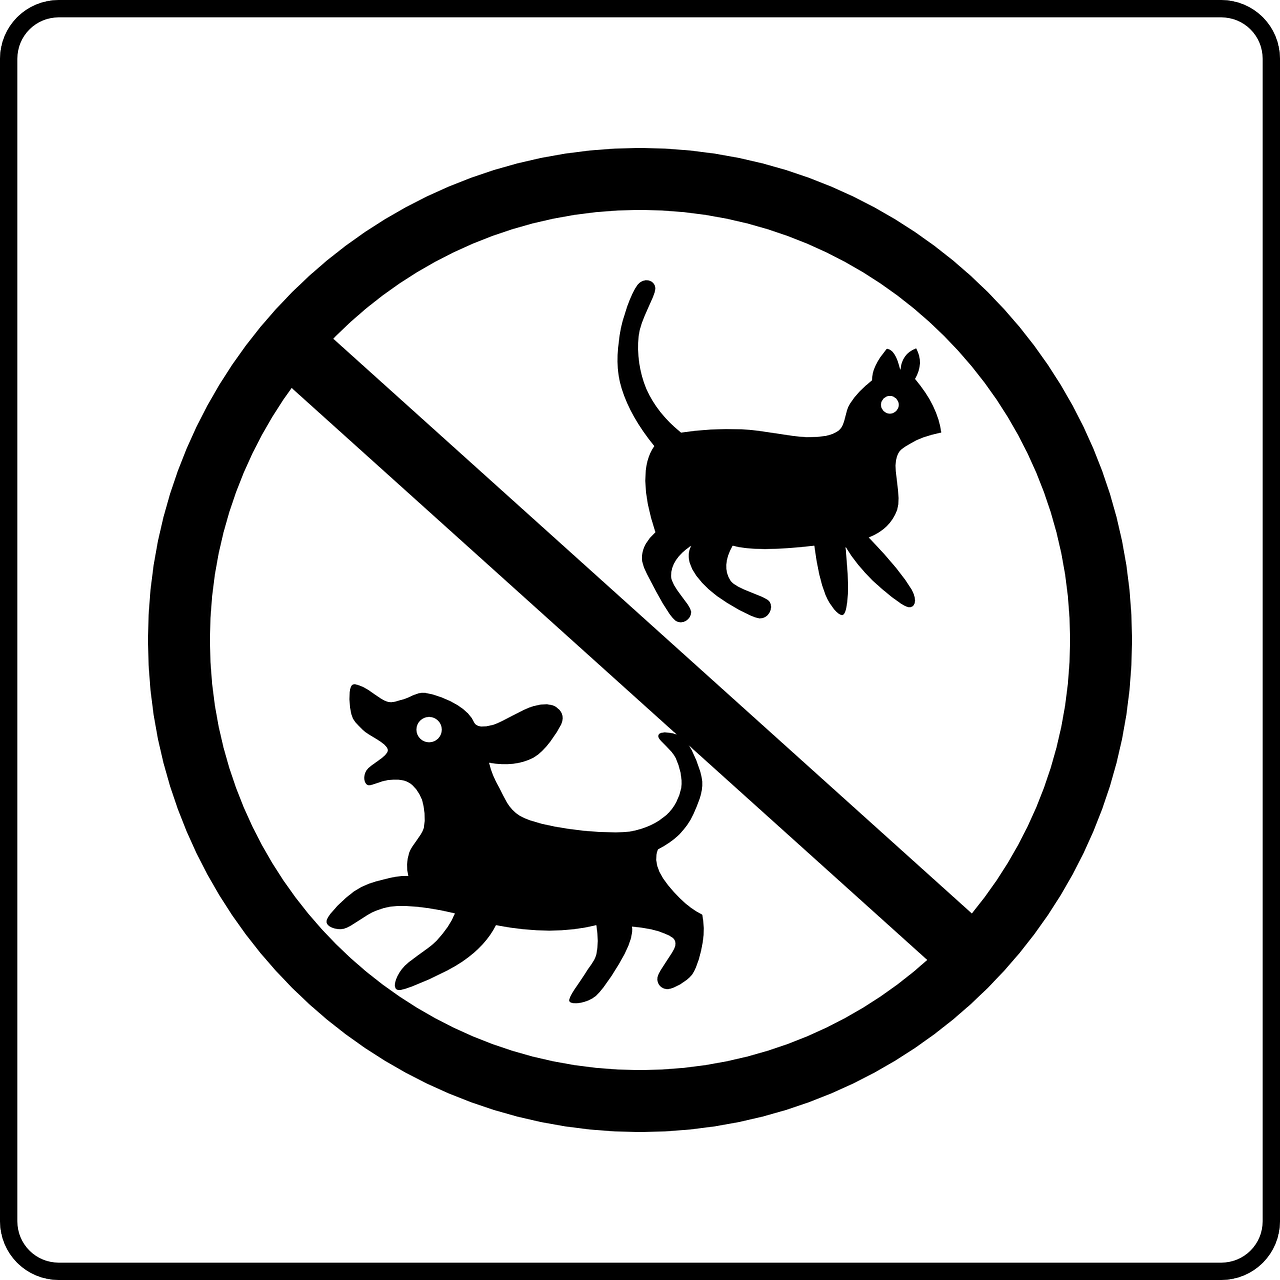 a black and white picture of a no dogs allowed sign, a picture, by Unkoku Togan, pixabay, sōsaku hanga, illustration of 2 cats, orthodox, small animals, animals chasing